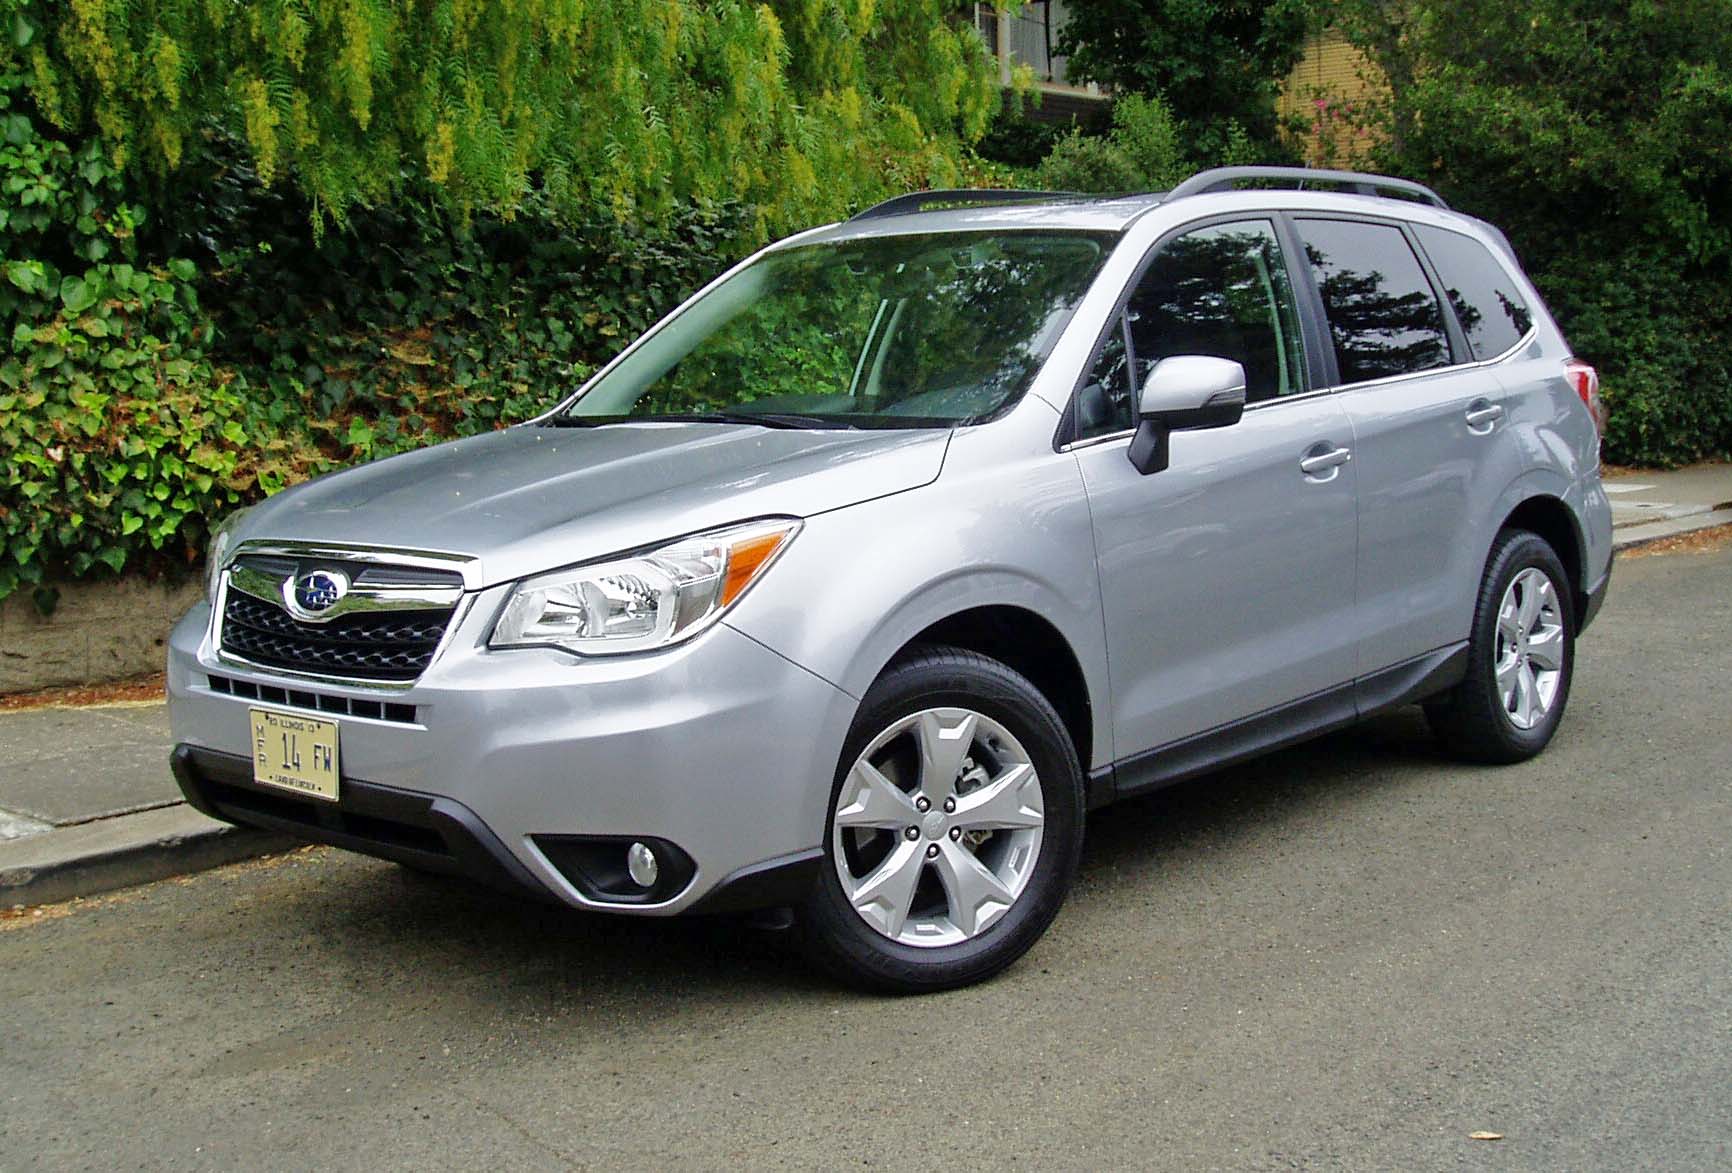 2014 Subaru Forester 2.5i Touring Test Drive